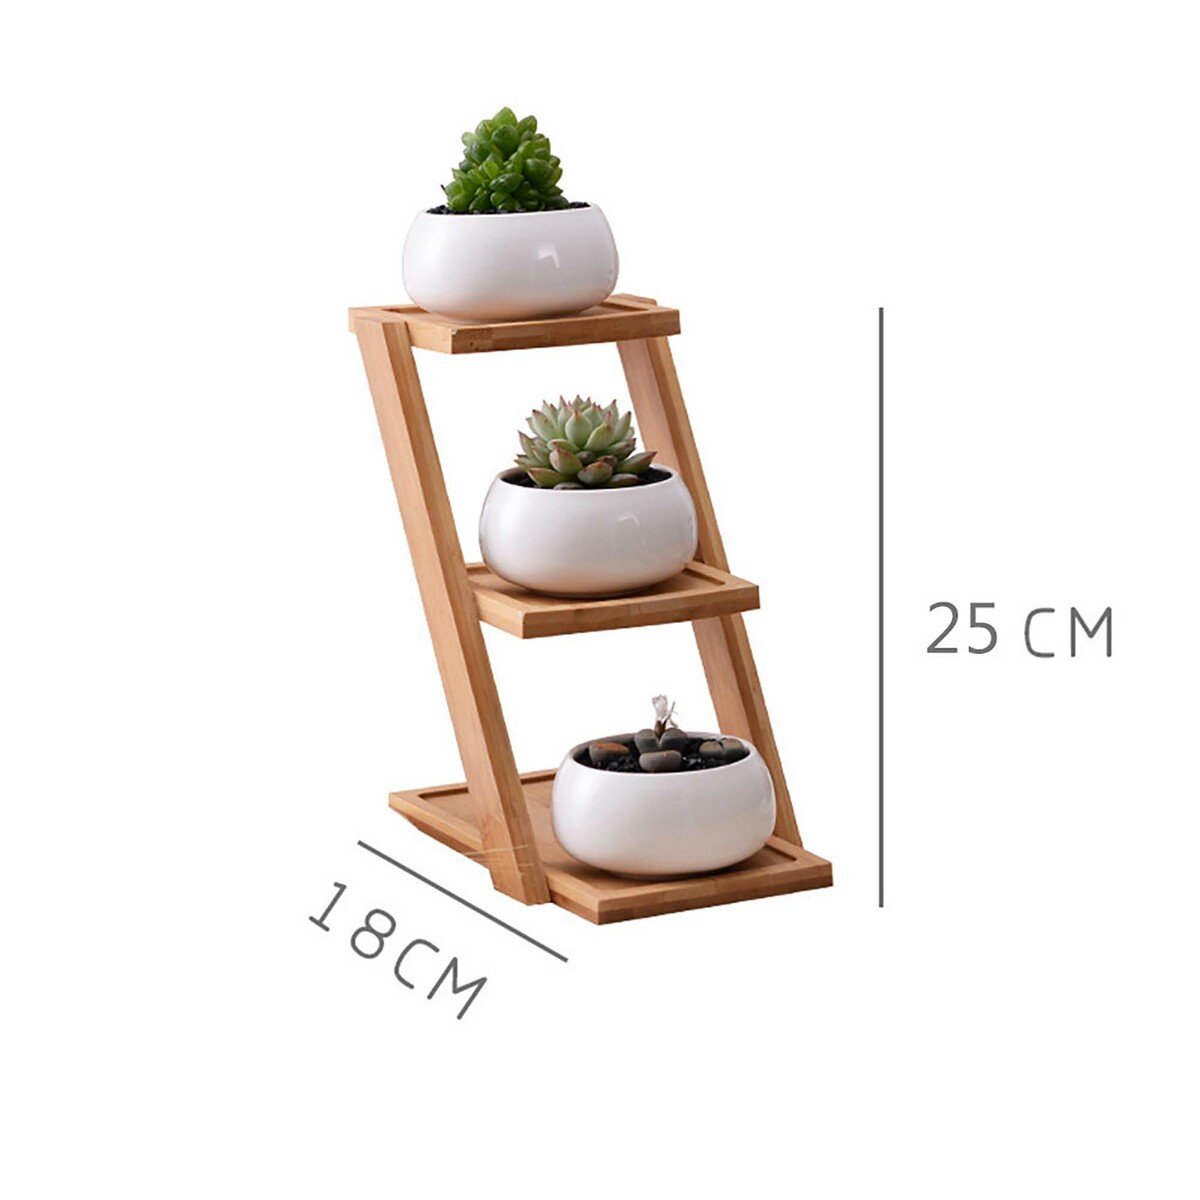 Maple Leaf 3pcs Flower Pot With Wooden Stand JL1010